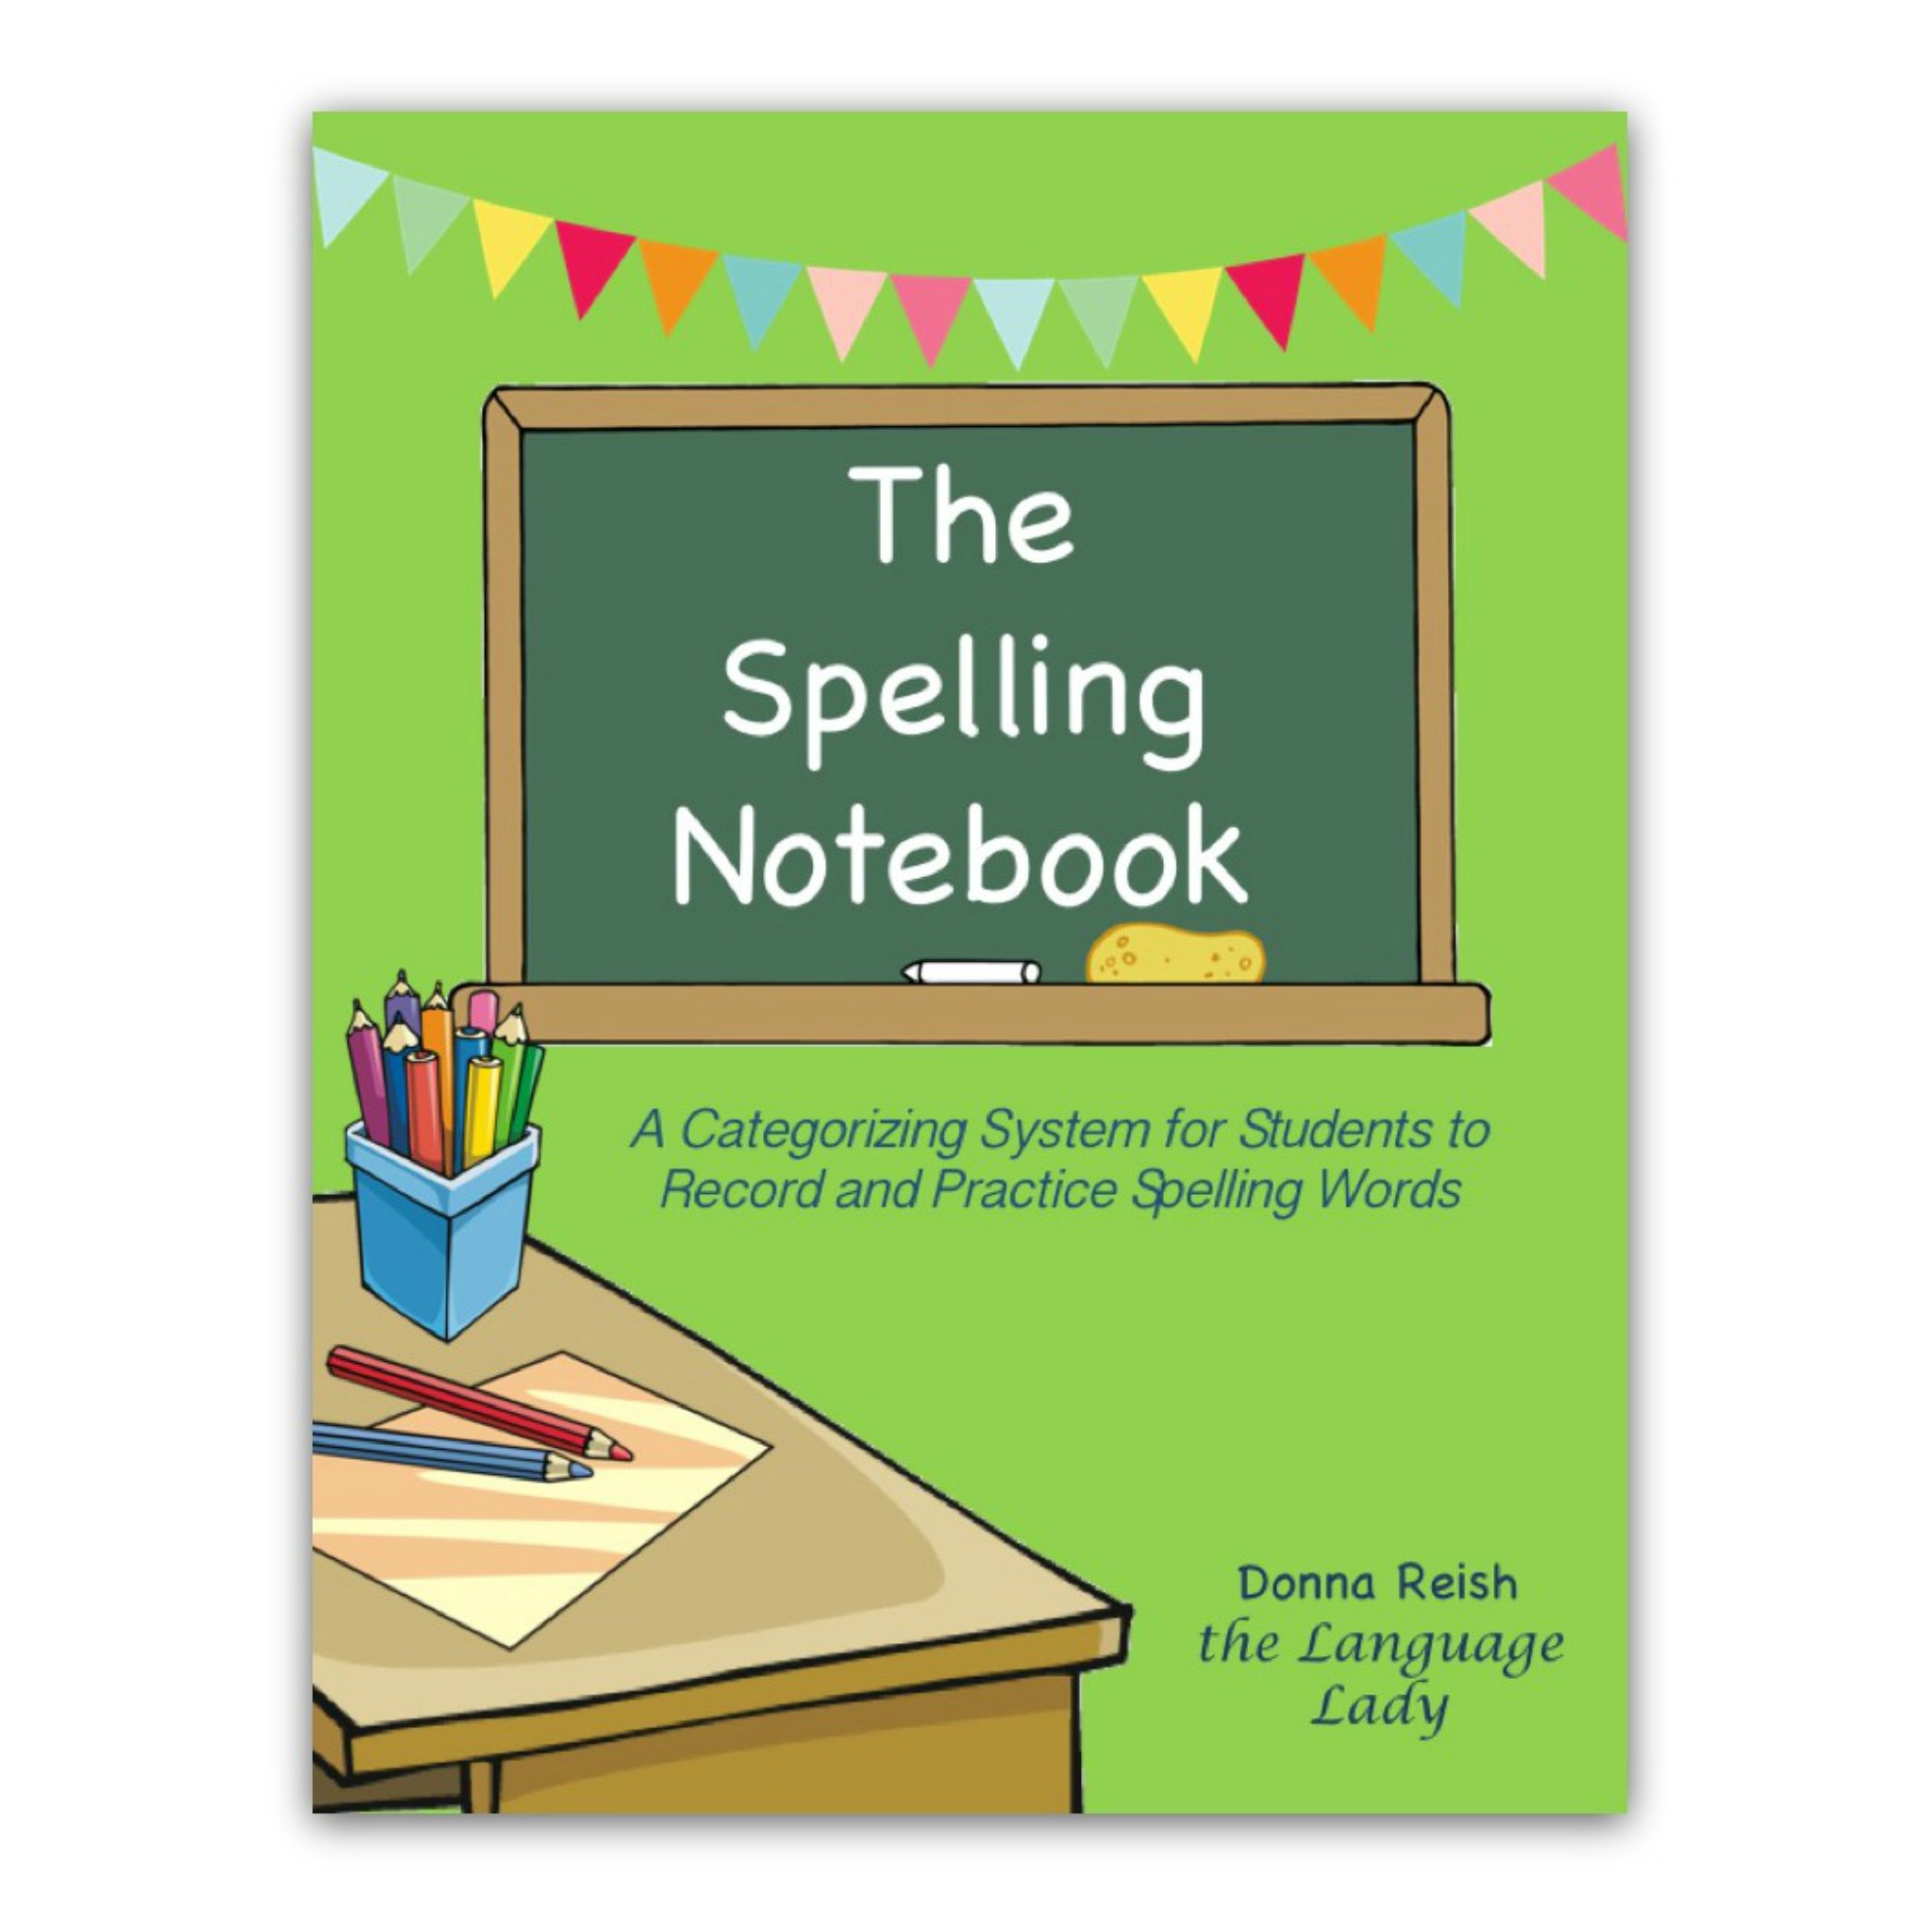 The Spelling Notebook